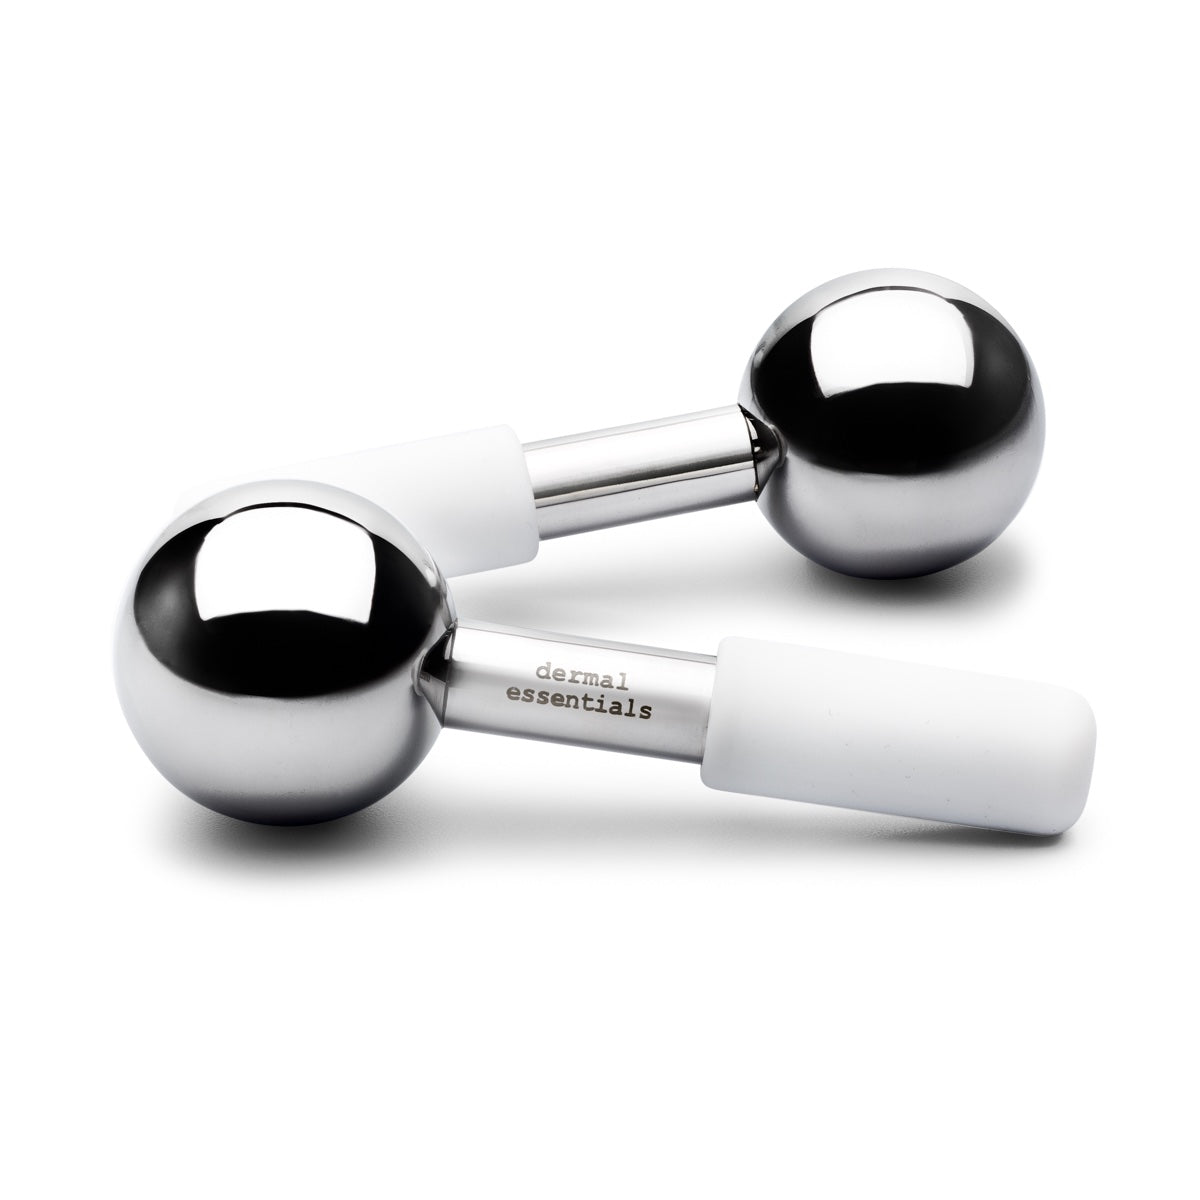 Two stainless steel ice beauty globes white foam handles calming skincare tool Dermal Essentials Medical Grade Skincare